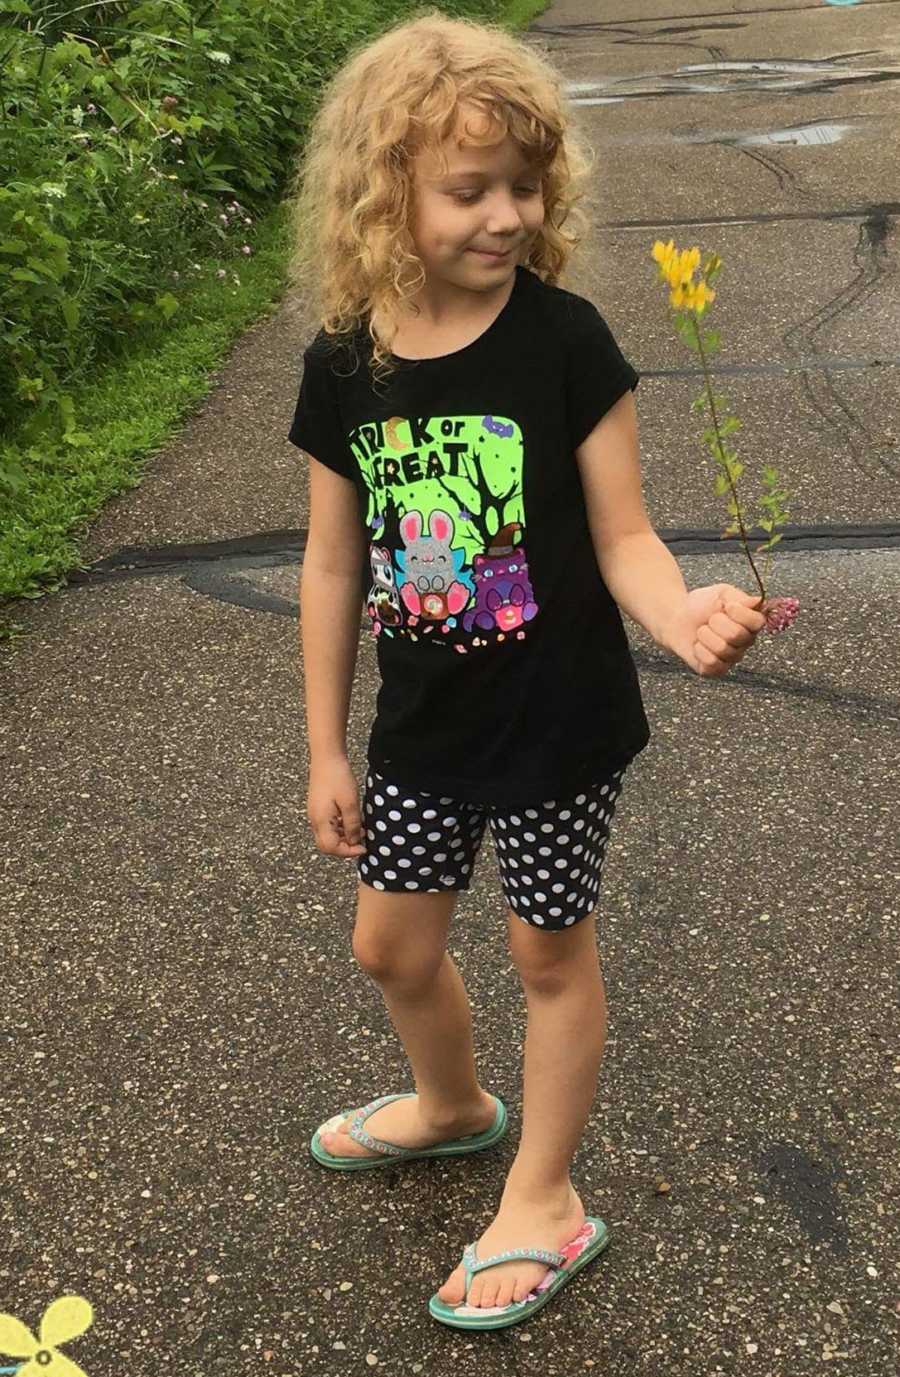 Little girl stands outside holding yellow flower